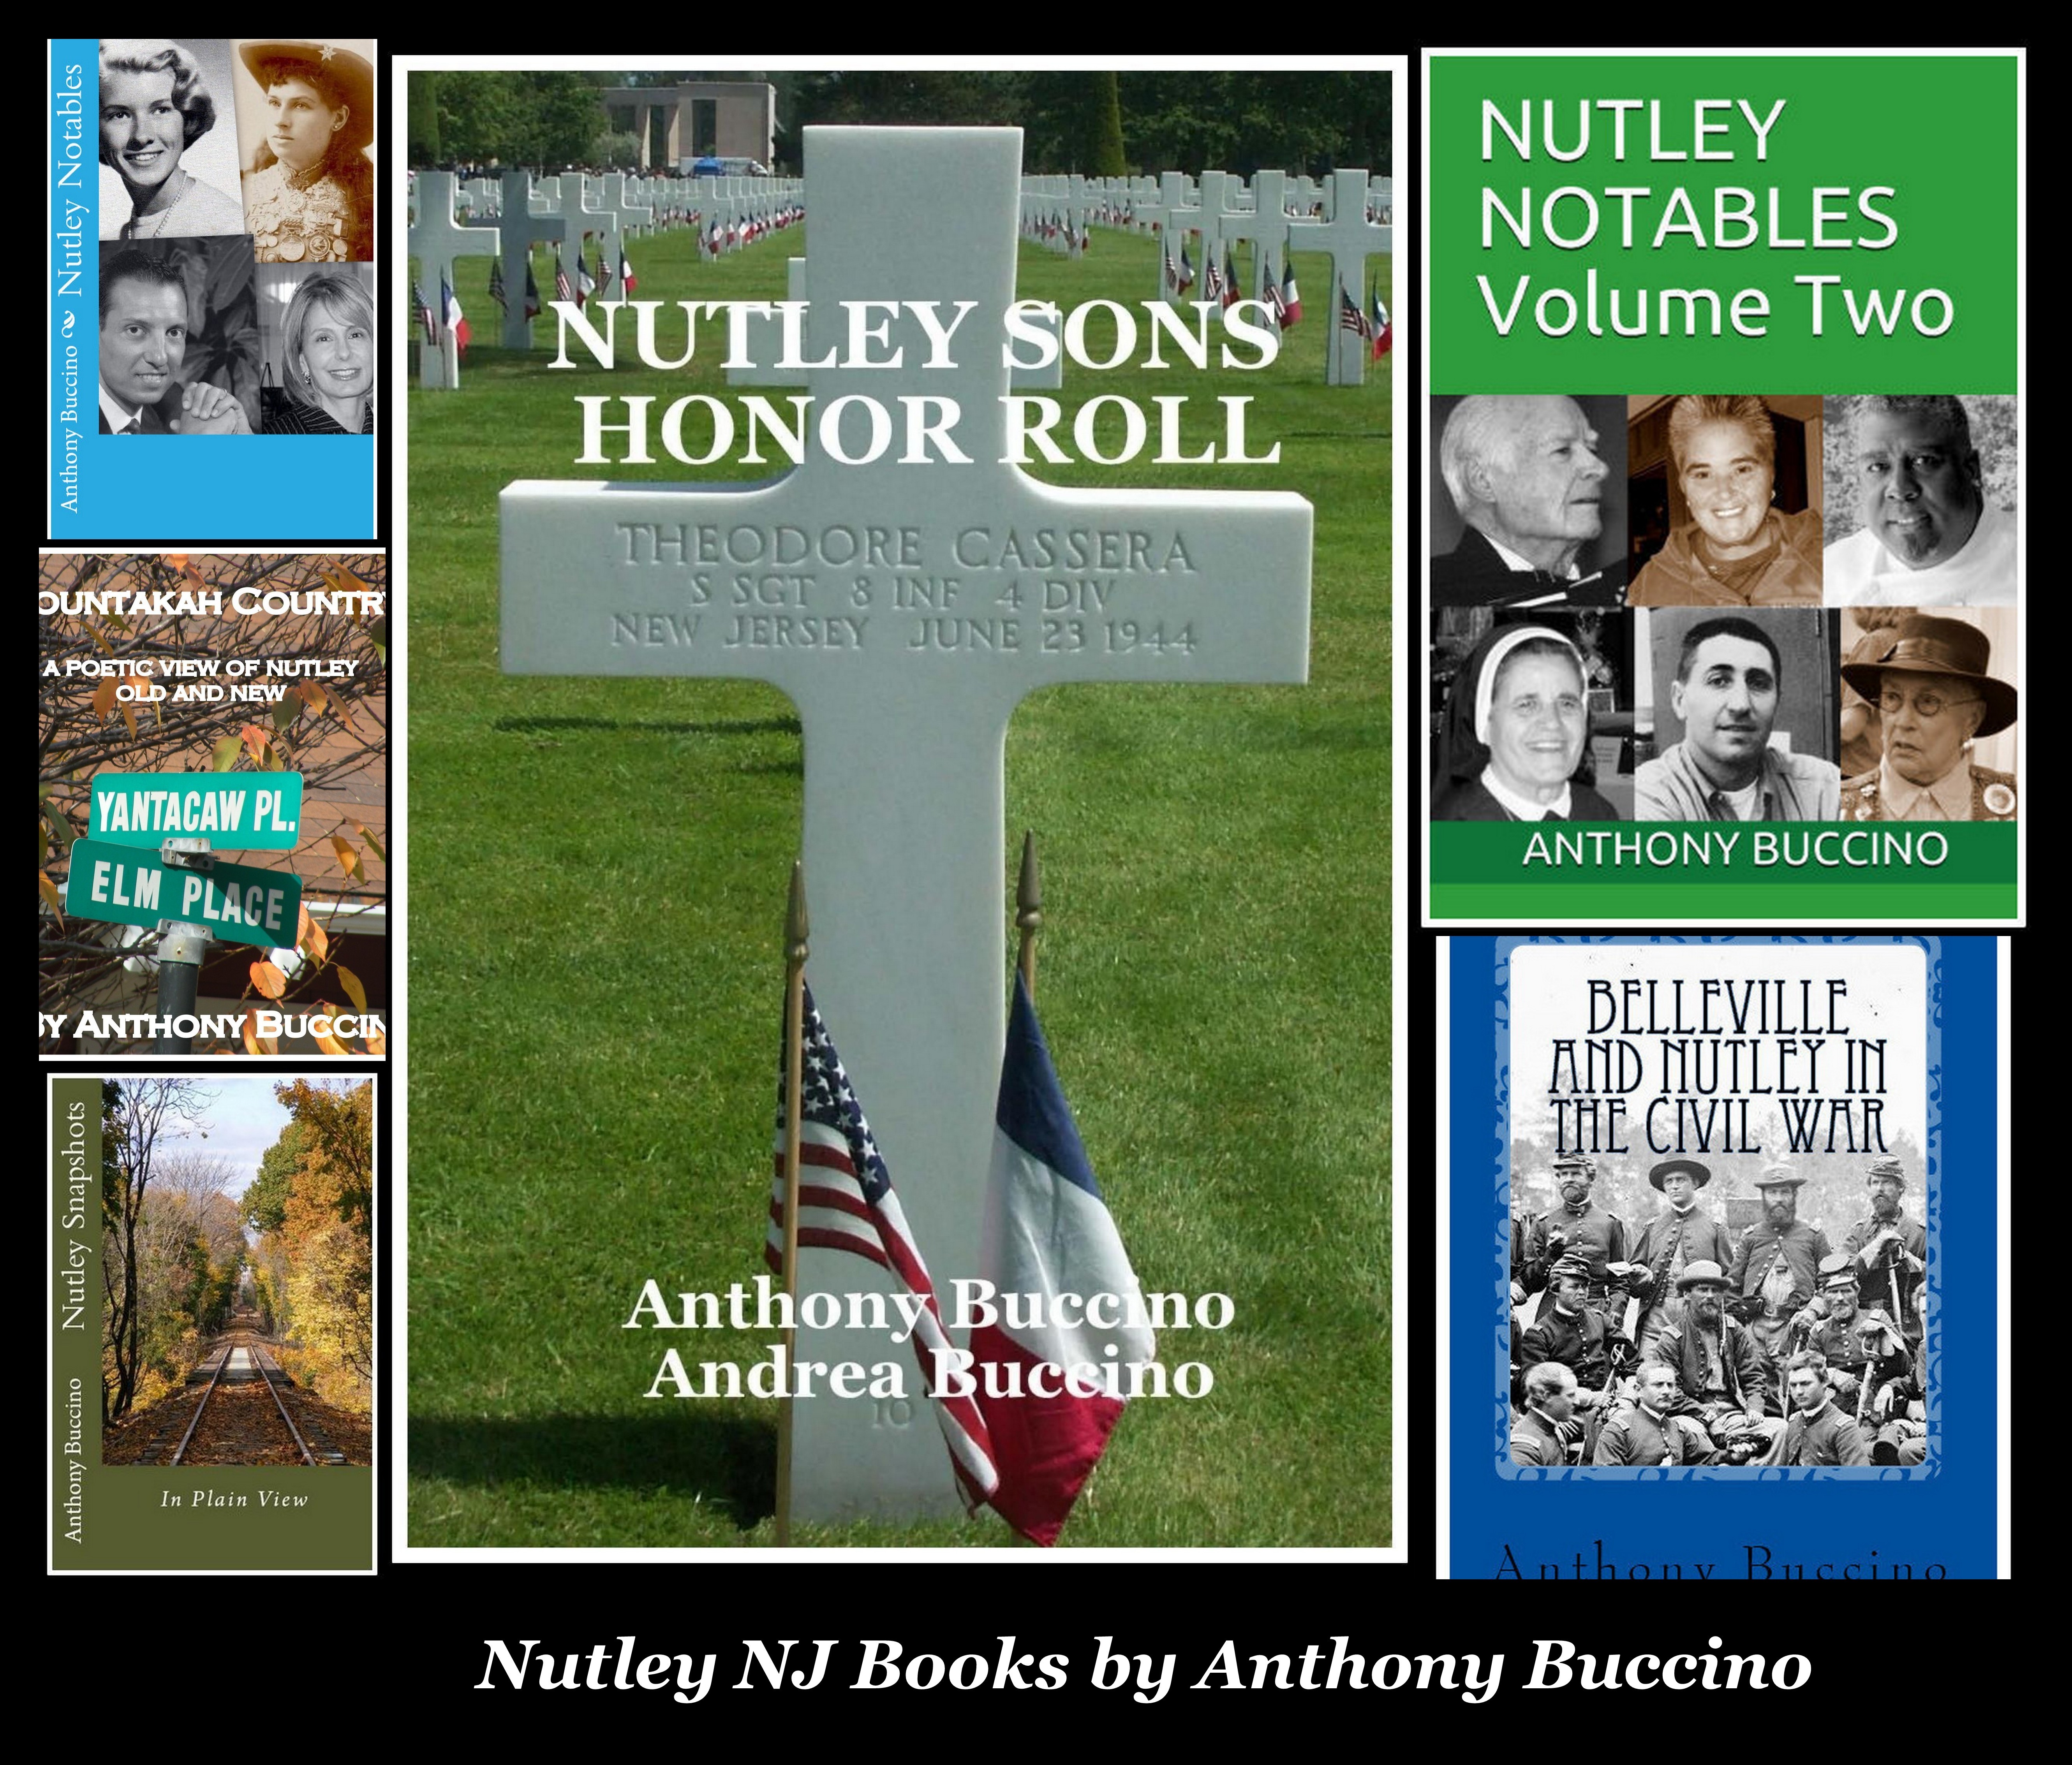 Nutley NJ books by Anthony Buccino